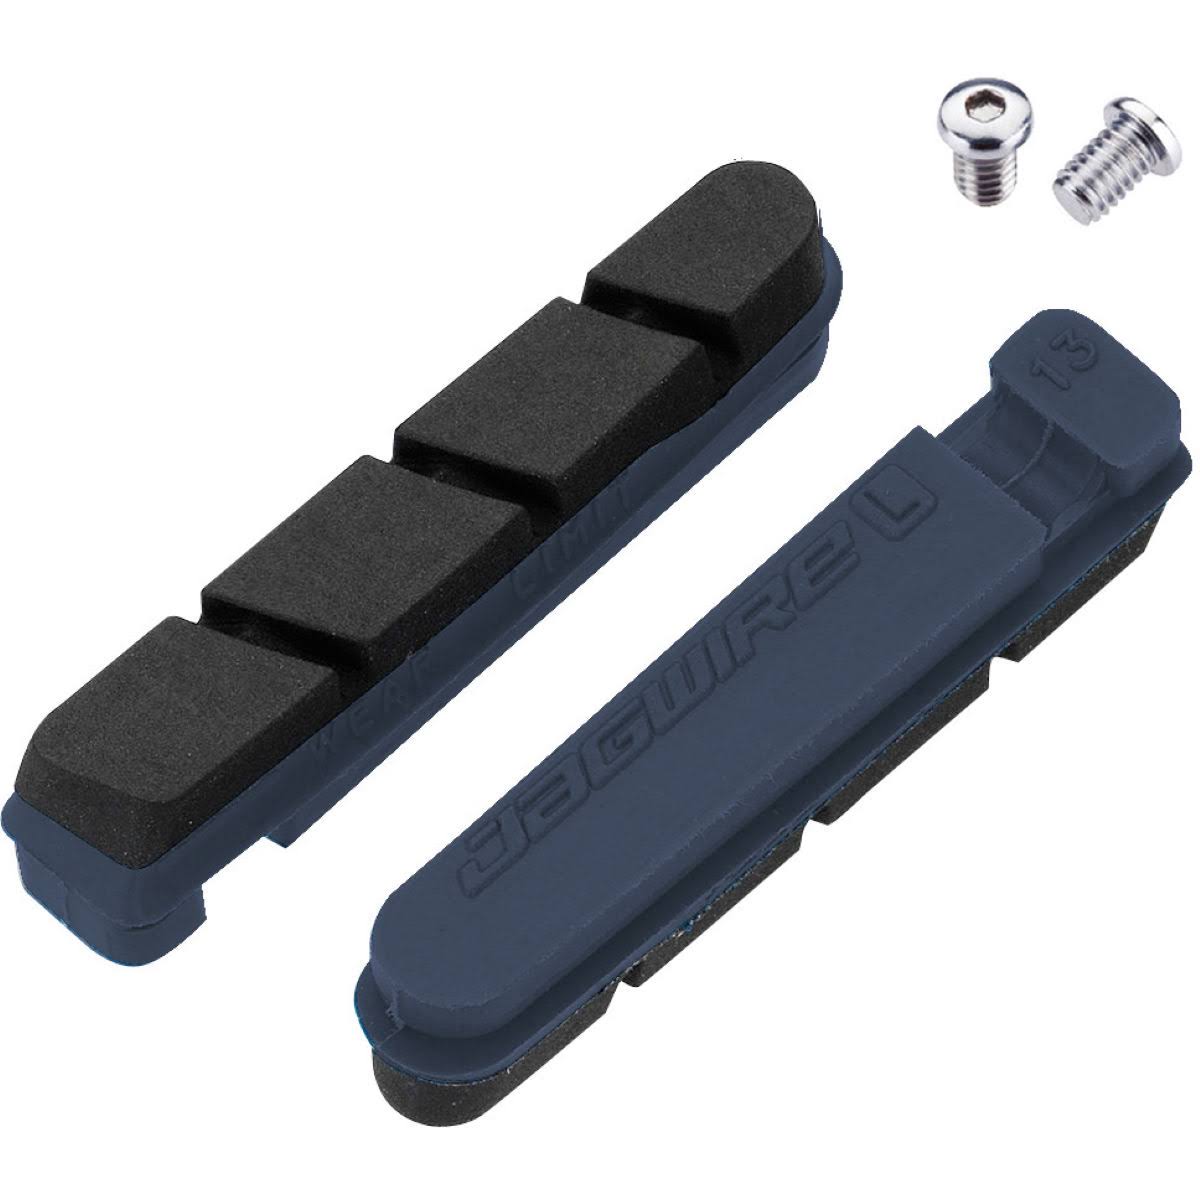 Jagwire Road Pro S Carbon Bike Brake Pad Inserts - for Sram and Shimano, Blue